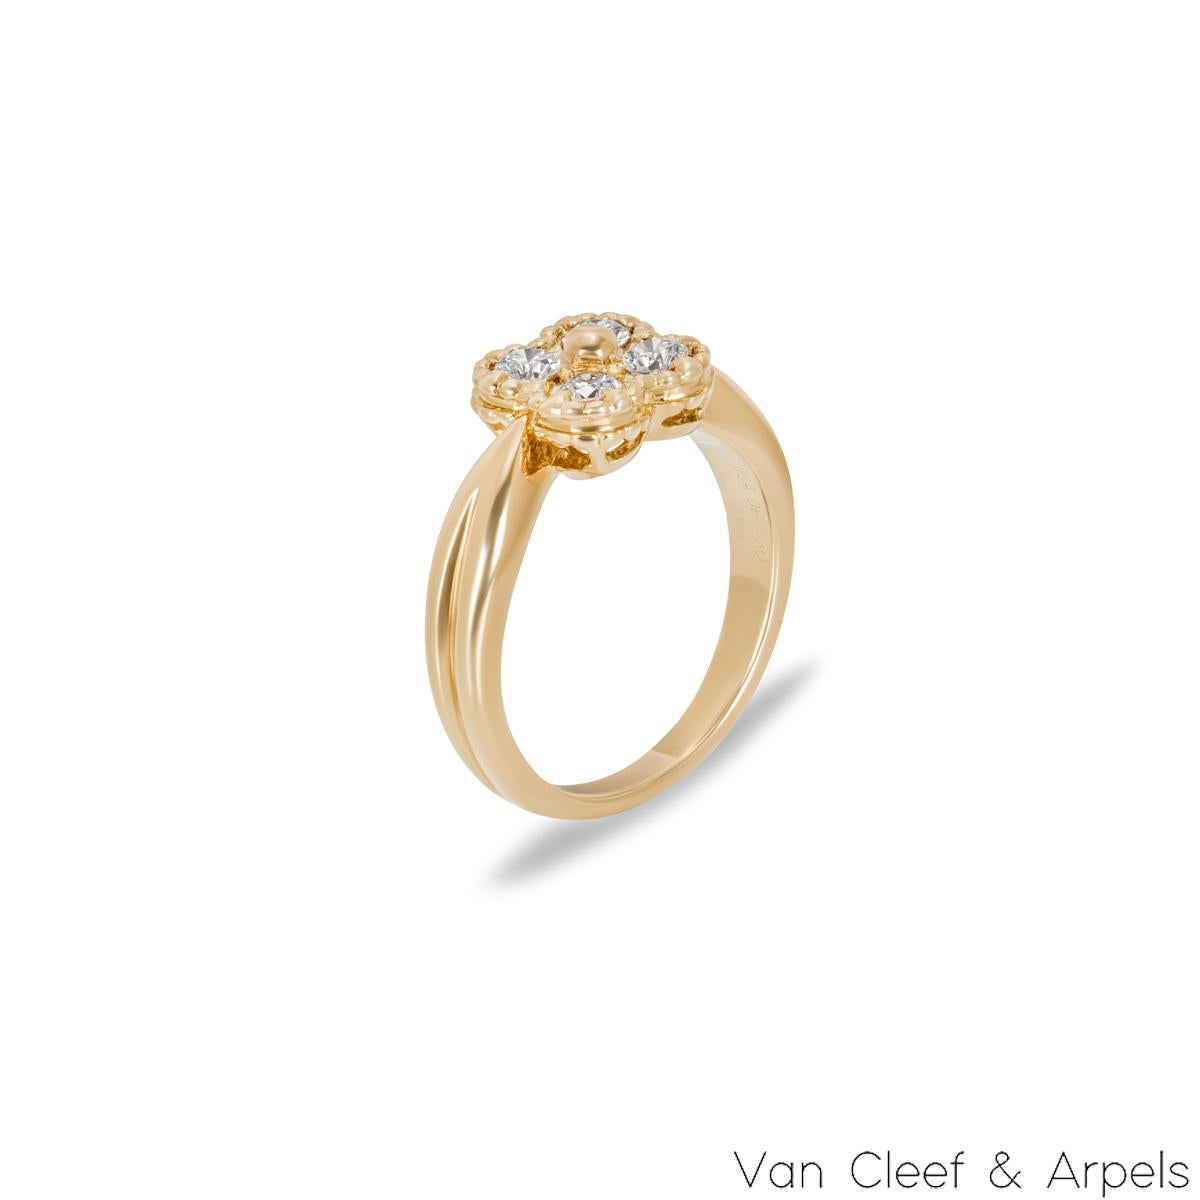 A lovely 18k yellow gold Van Cleef & Arpels diamond ring from the Arno collection. The dress ring features a clover motif finished with a beaded edge, set with four round brilliant cut diamonds with an approximate total weight of 0.28ct, F-G colour